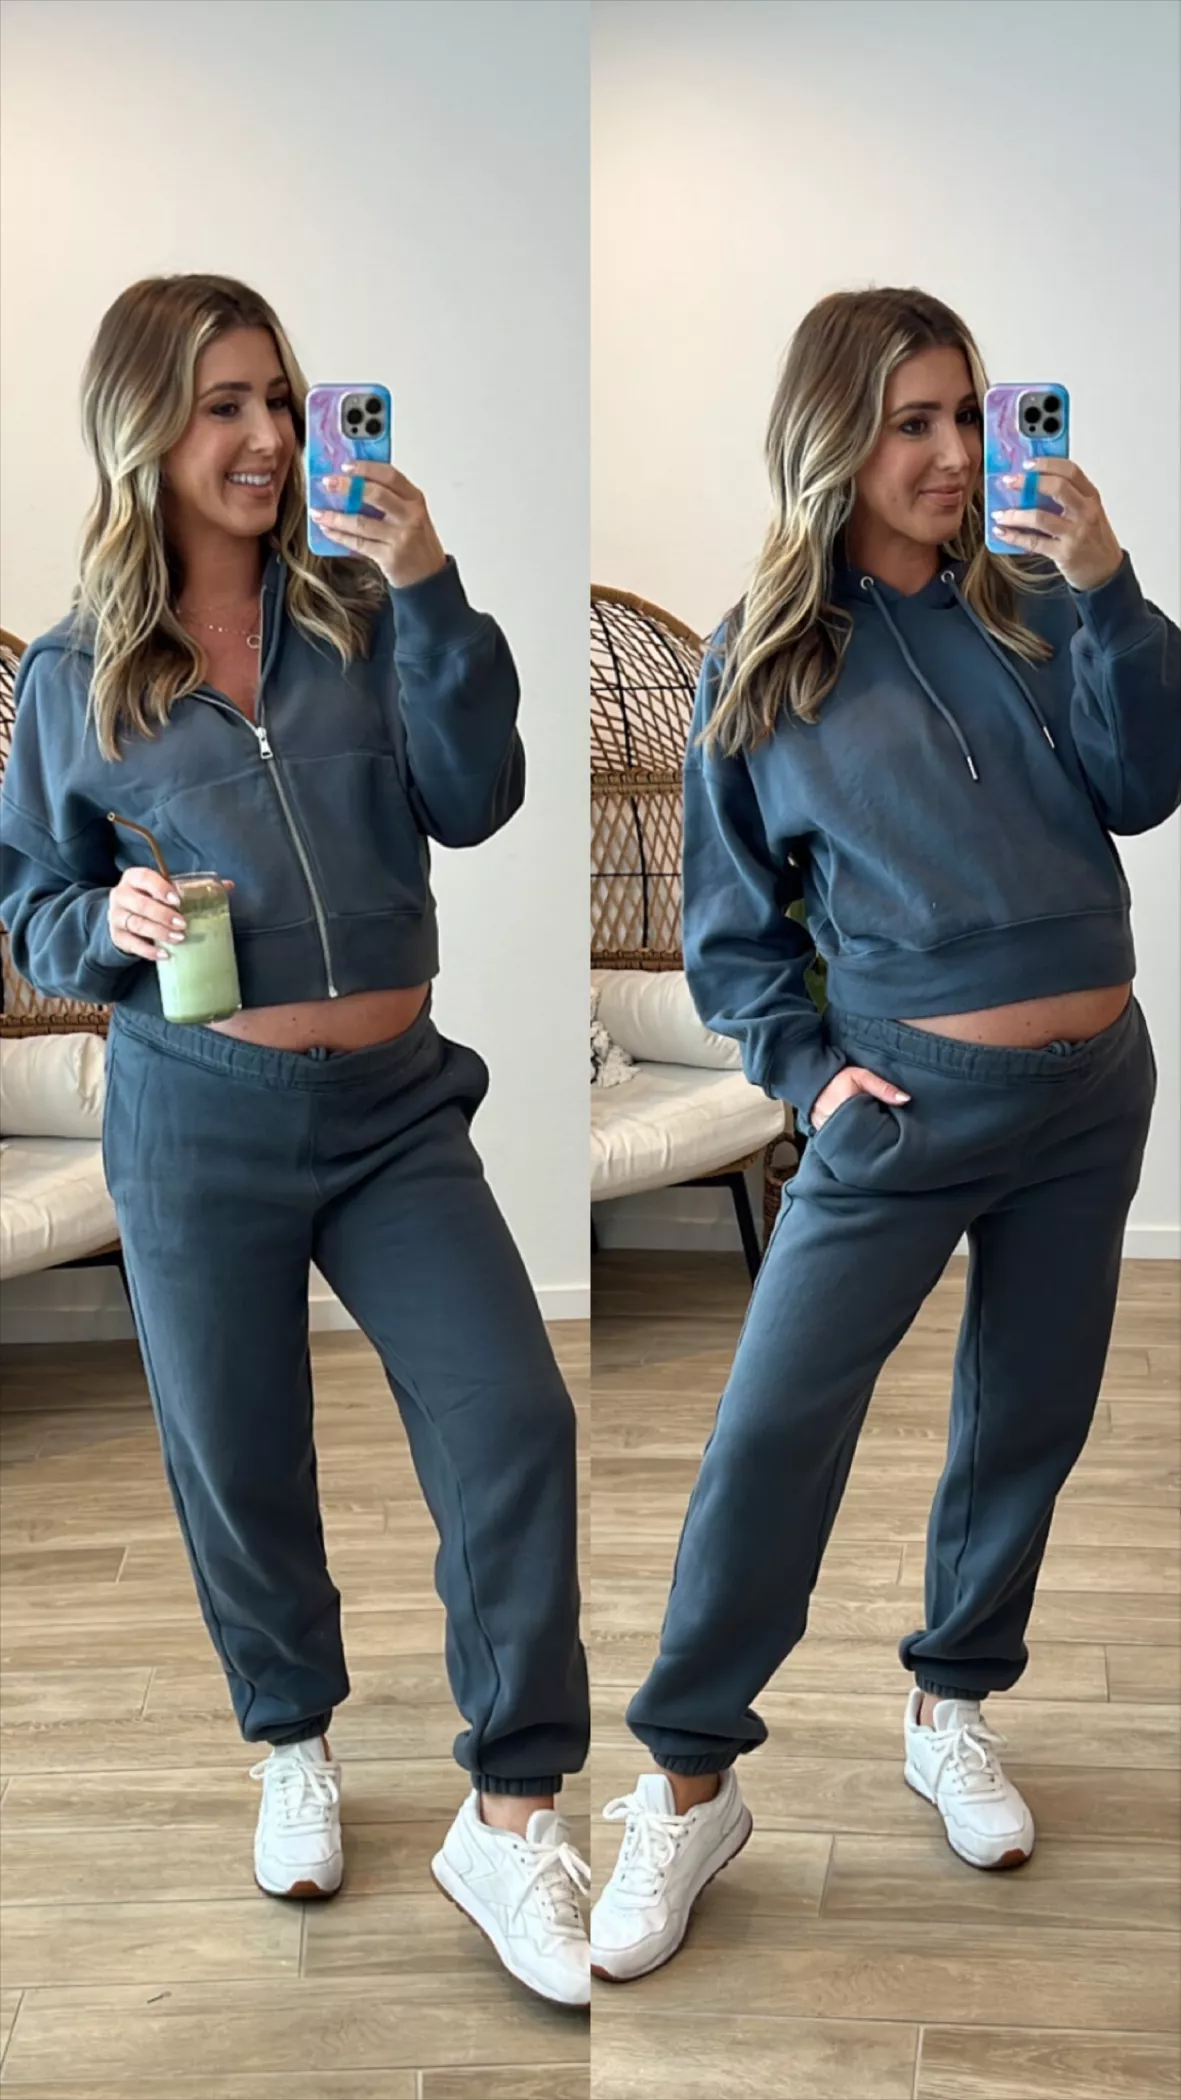 Shoes with Sweatpants 20 Outfit Ideas for Girls